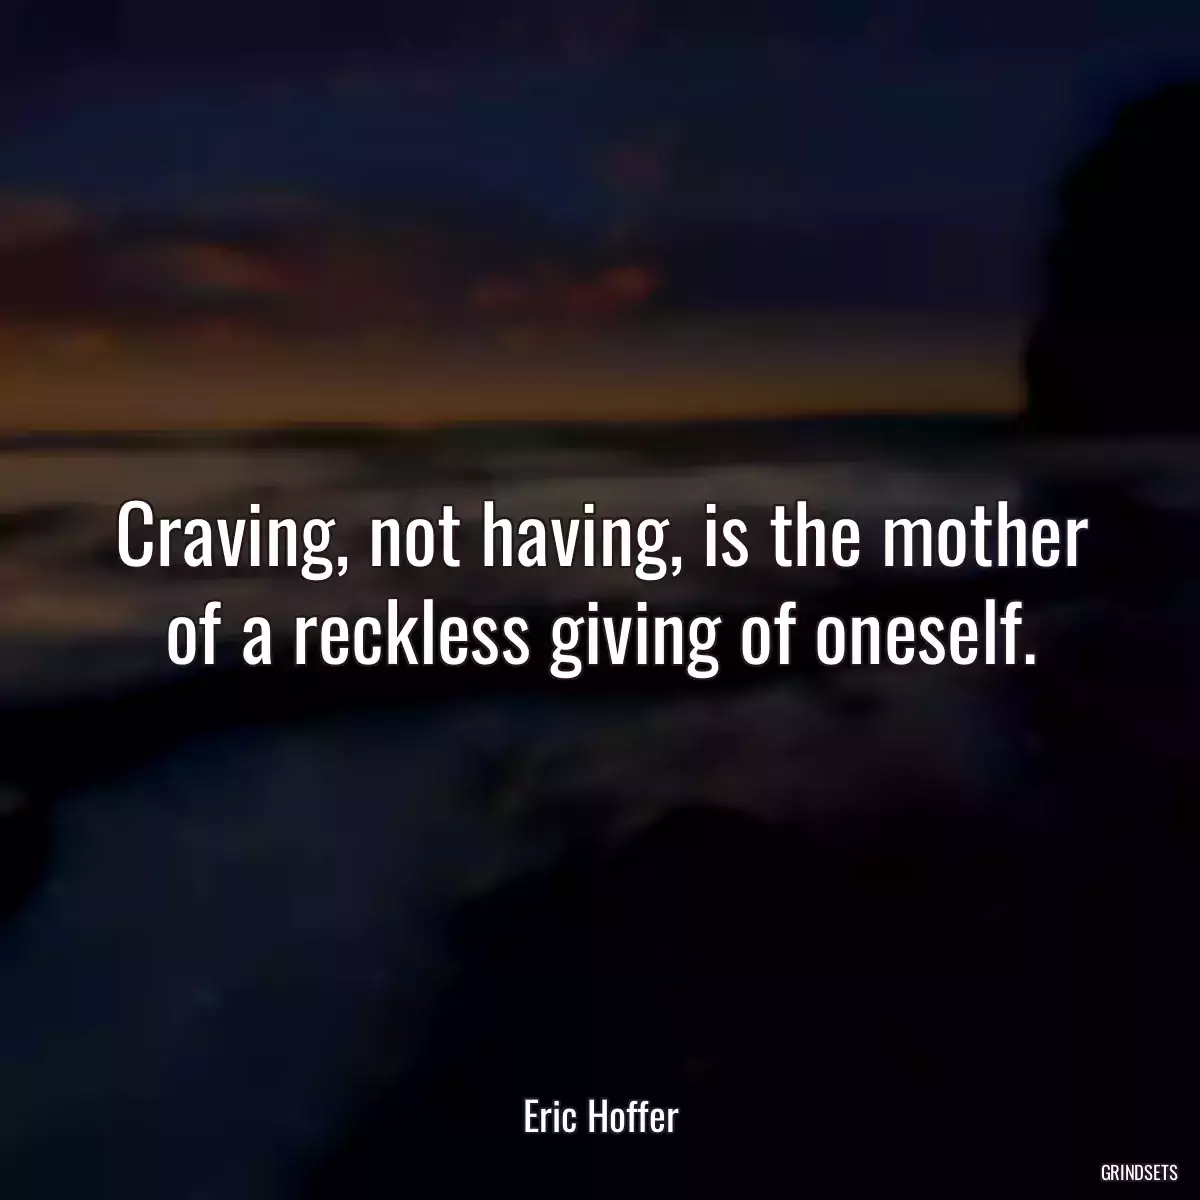 Craving, not having, is the mother of a reckless giving of oneself.